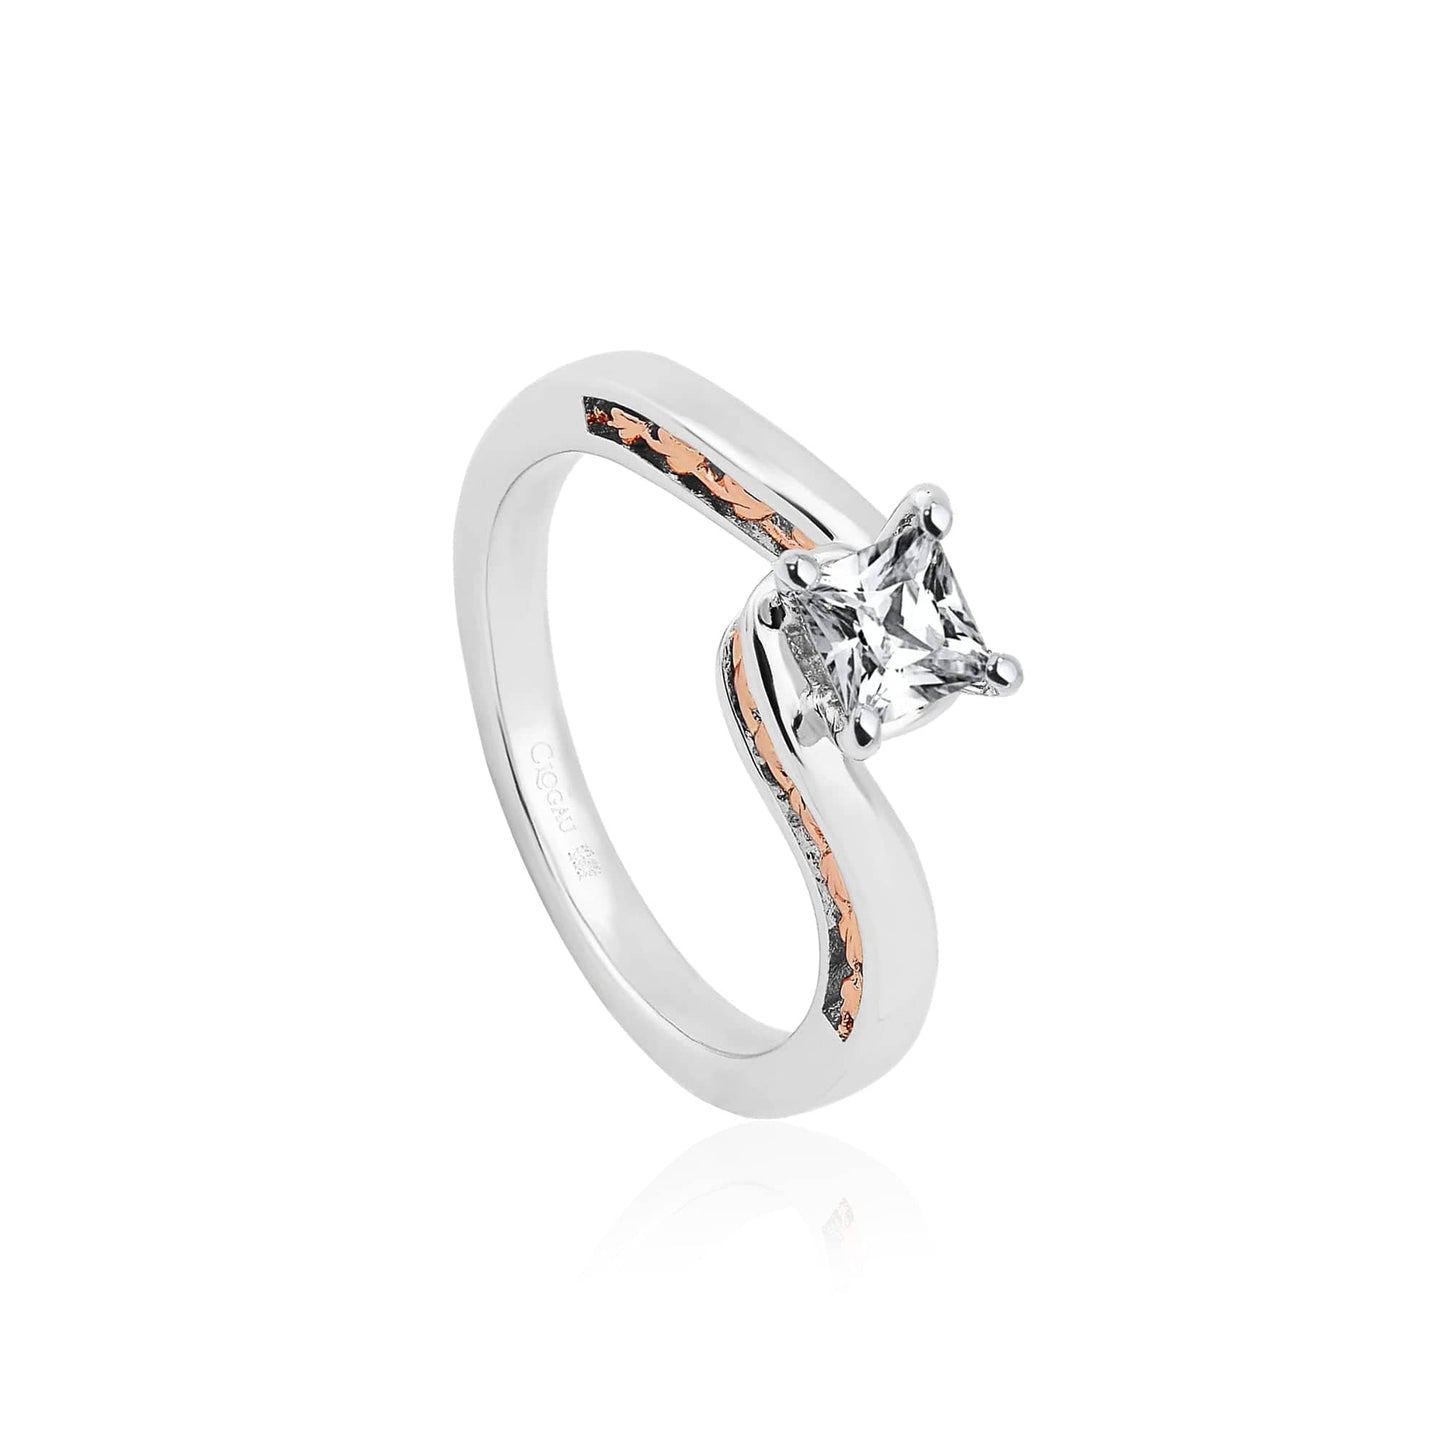 9ct White Gold Forever Fairy-Tale Engagement Ring with 0.3ct Princess Cut Diamond